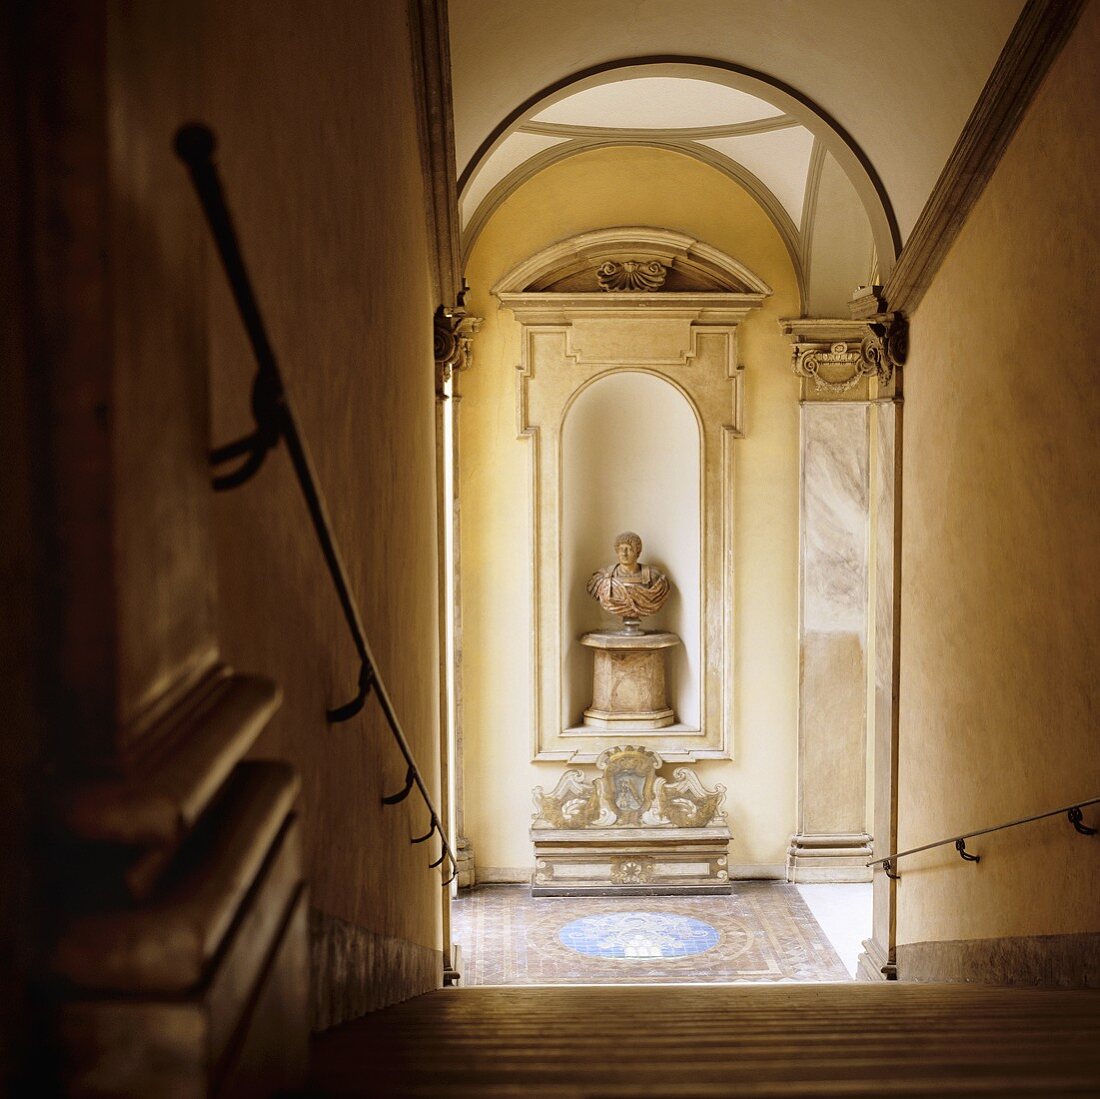 A stairway in a palazzo - a view from the stairs of a bust on a pedestal in a wall niche